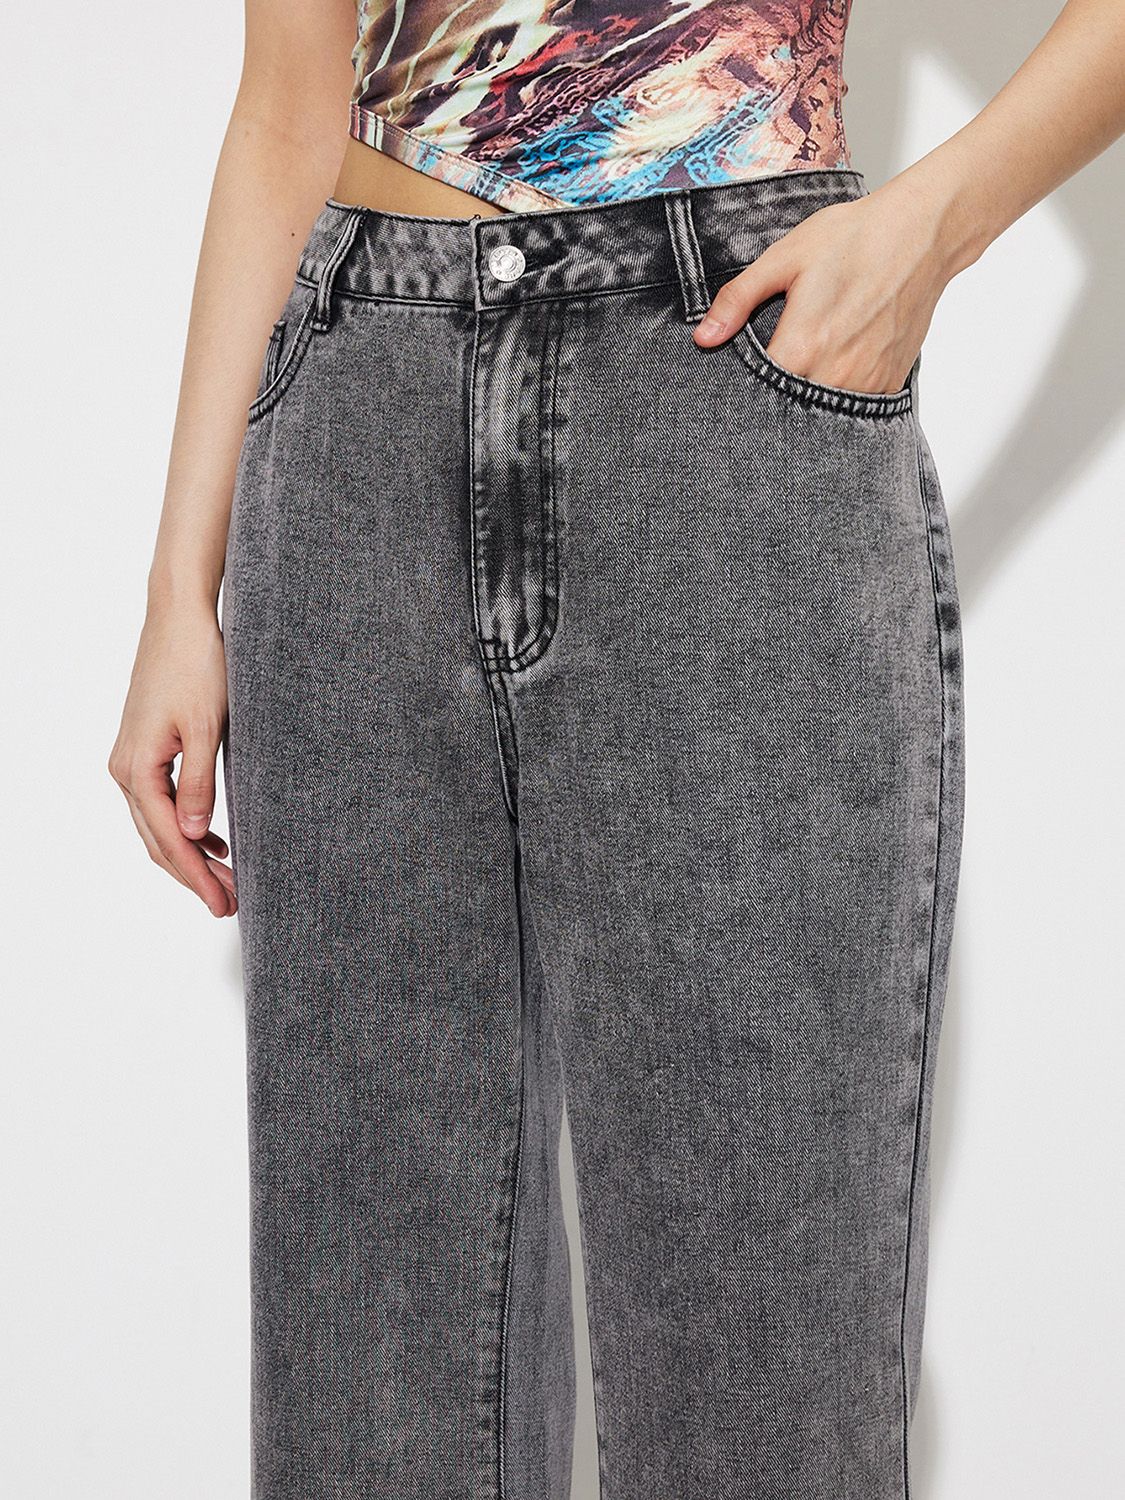 High Waist Bootcut Jeans with Pockets